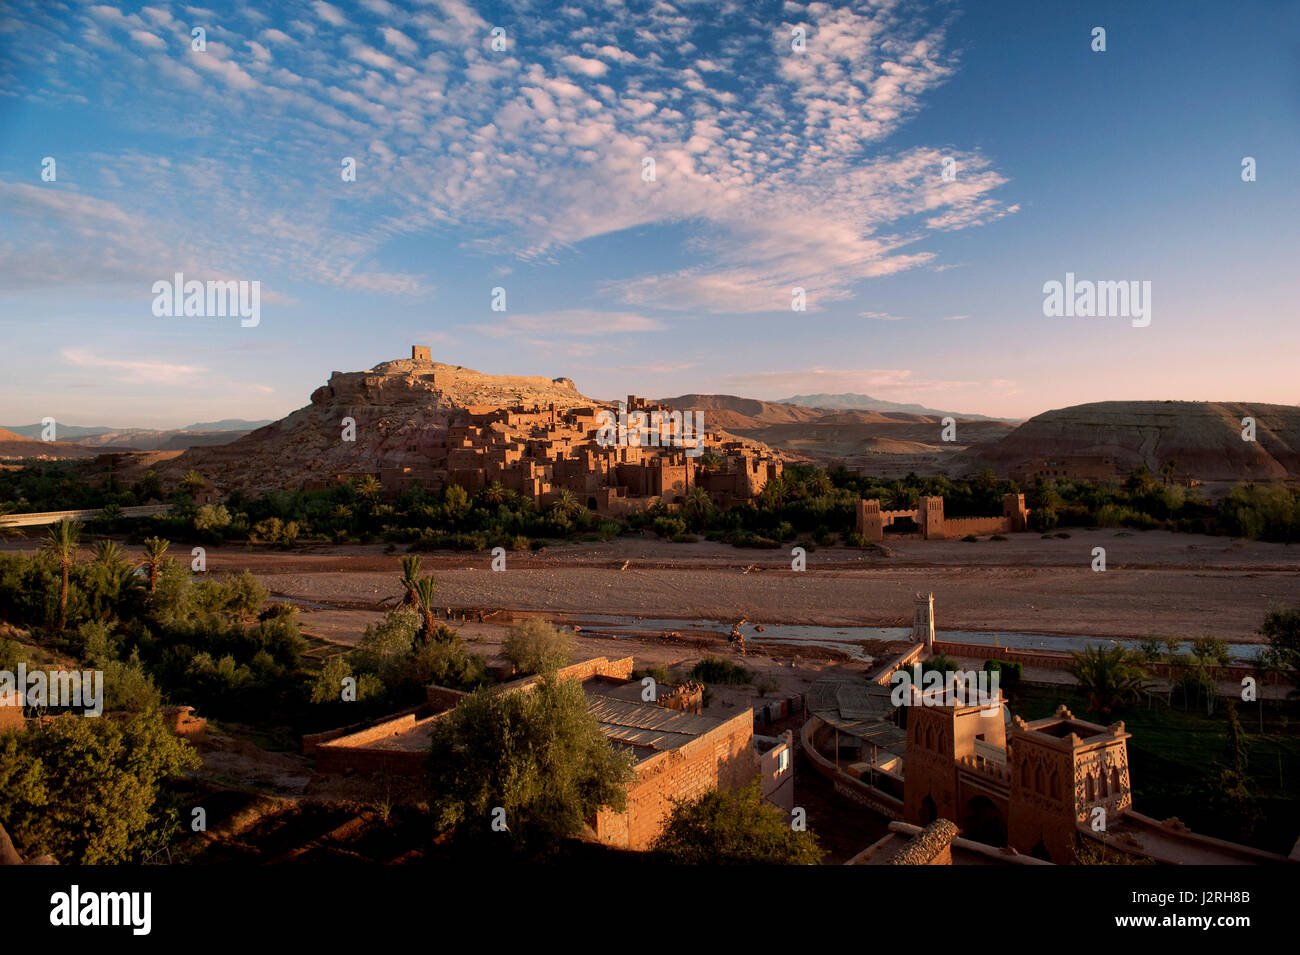 The fortified town or ksar of Ait Benhaddou lit up at sunrise in Morocco's arid Atlas Mountains. it is a UNESCO World Heritage Site. Stock Photo